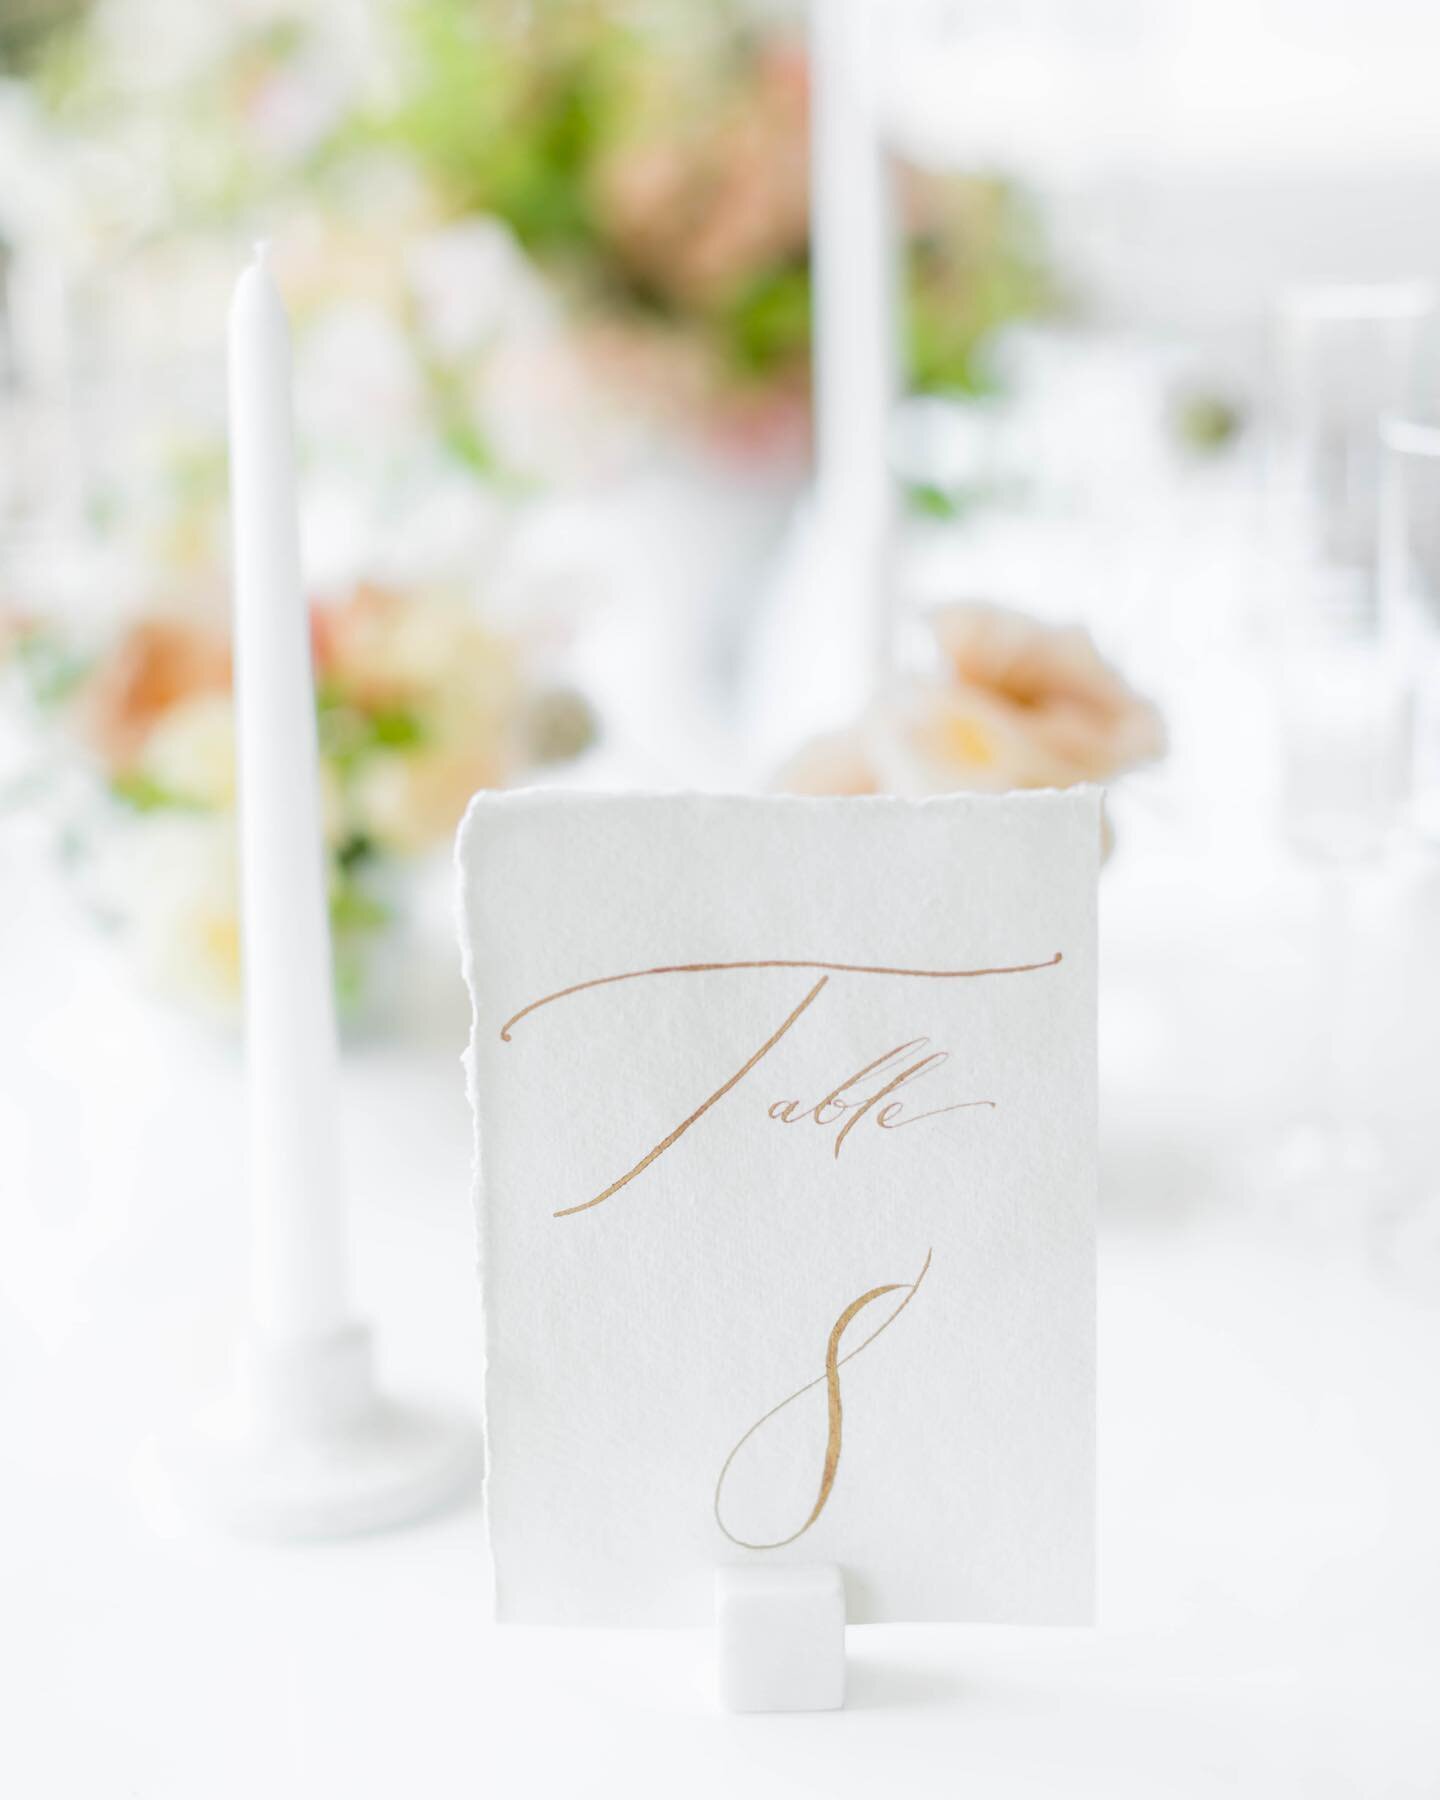 A table number perfect for your next modern, sophisticated event. She's hand calligraphed in gold ink with a combination of modern straight edges &amp; deckled edges on textured handmade paper. Distinguished, elegant, and all class.⁣
⁣⁣
View more on 